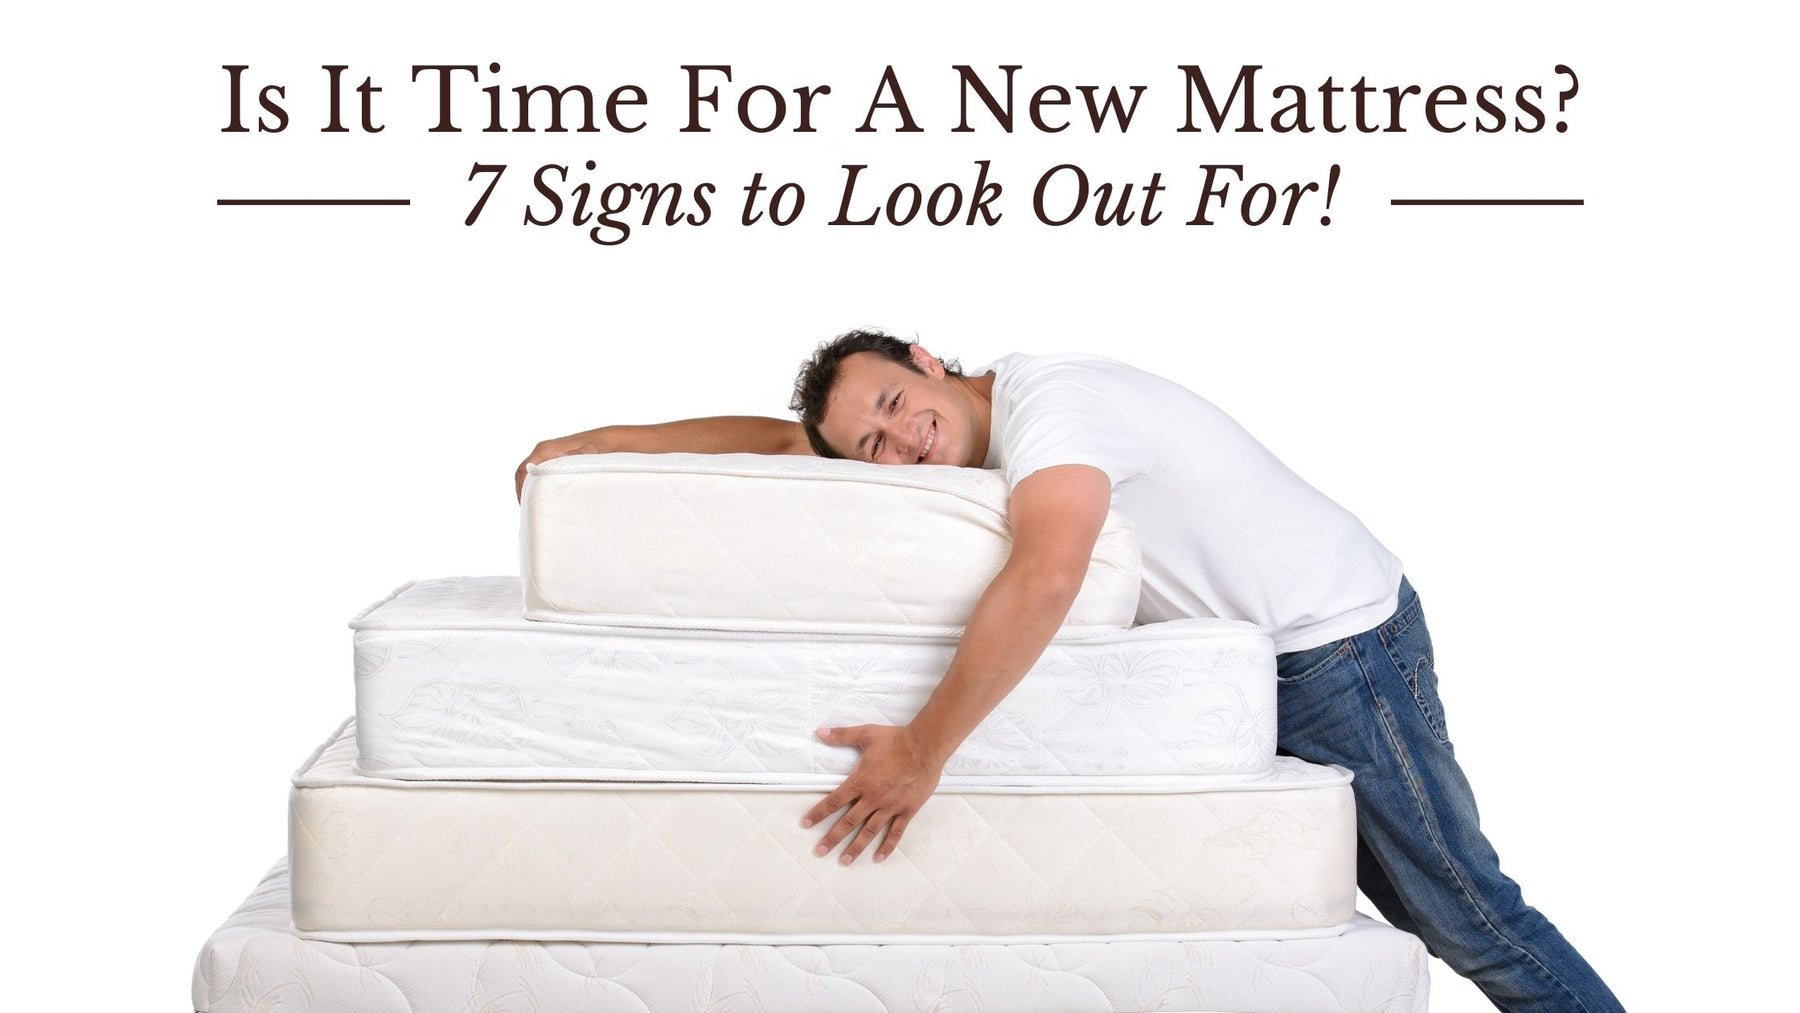 Is It Time For A New Mattress? 7 Signs to Look Out For!